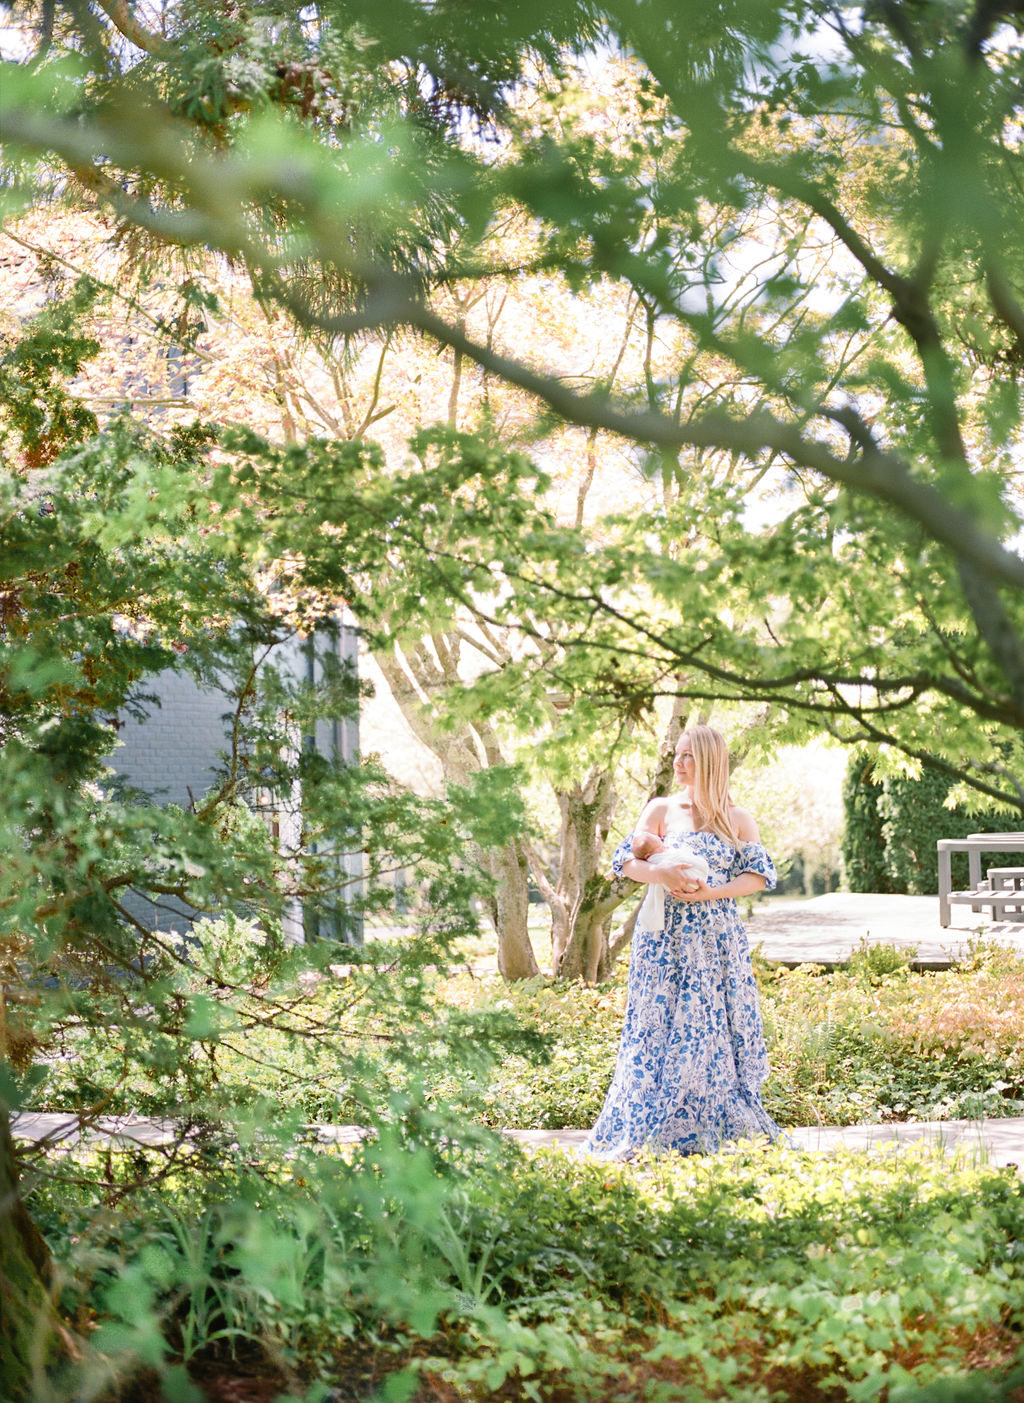 A mother in a blue floral dress stands in a park sidewalk holding her sleeping newborn baby